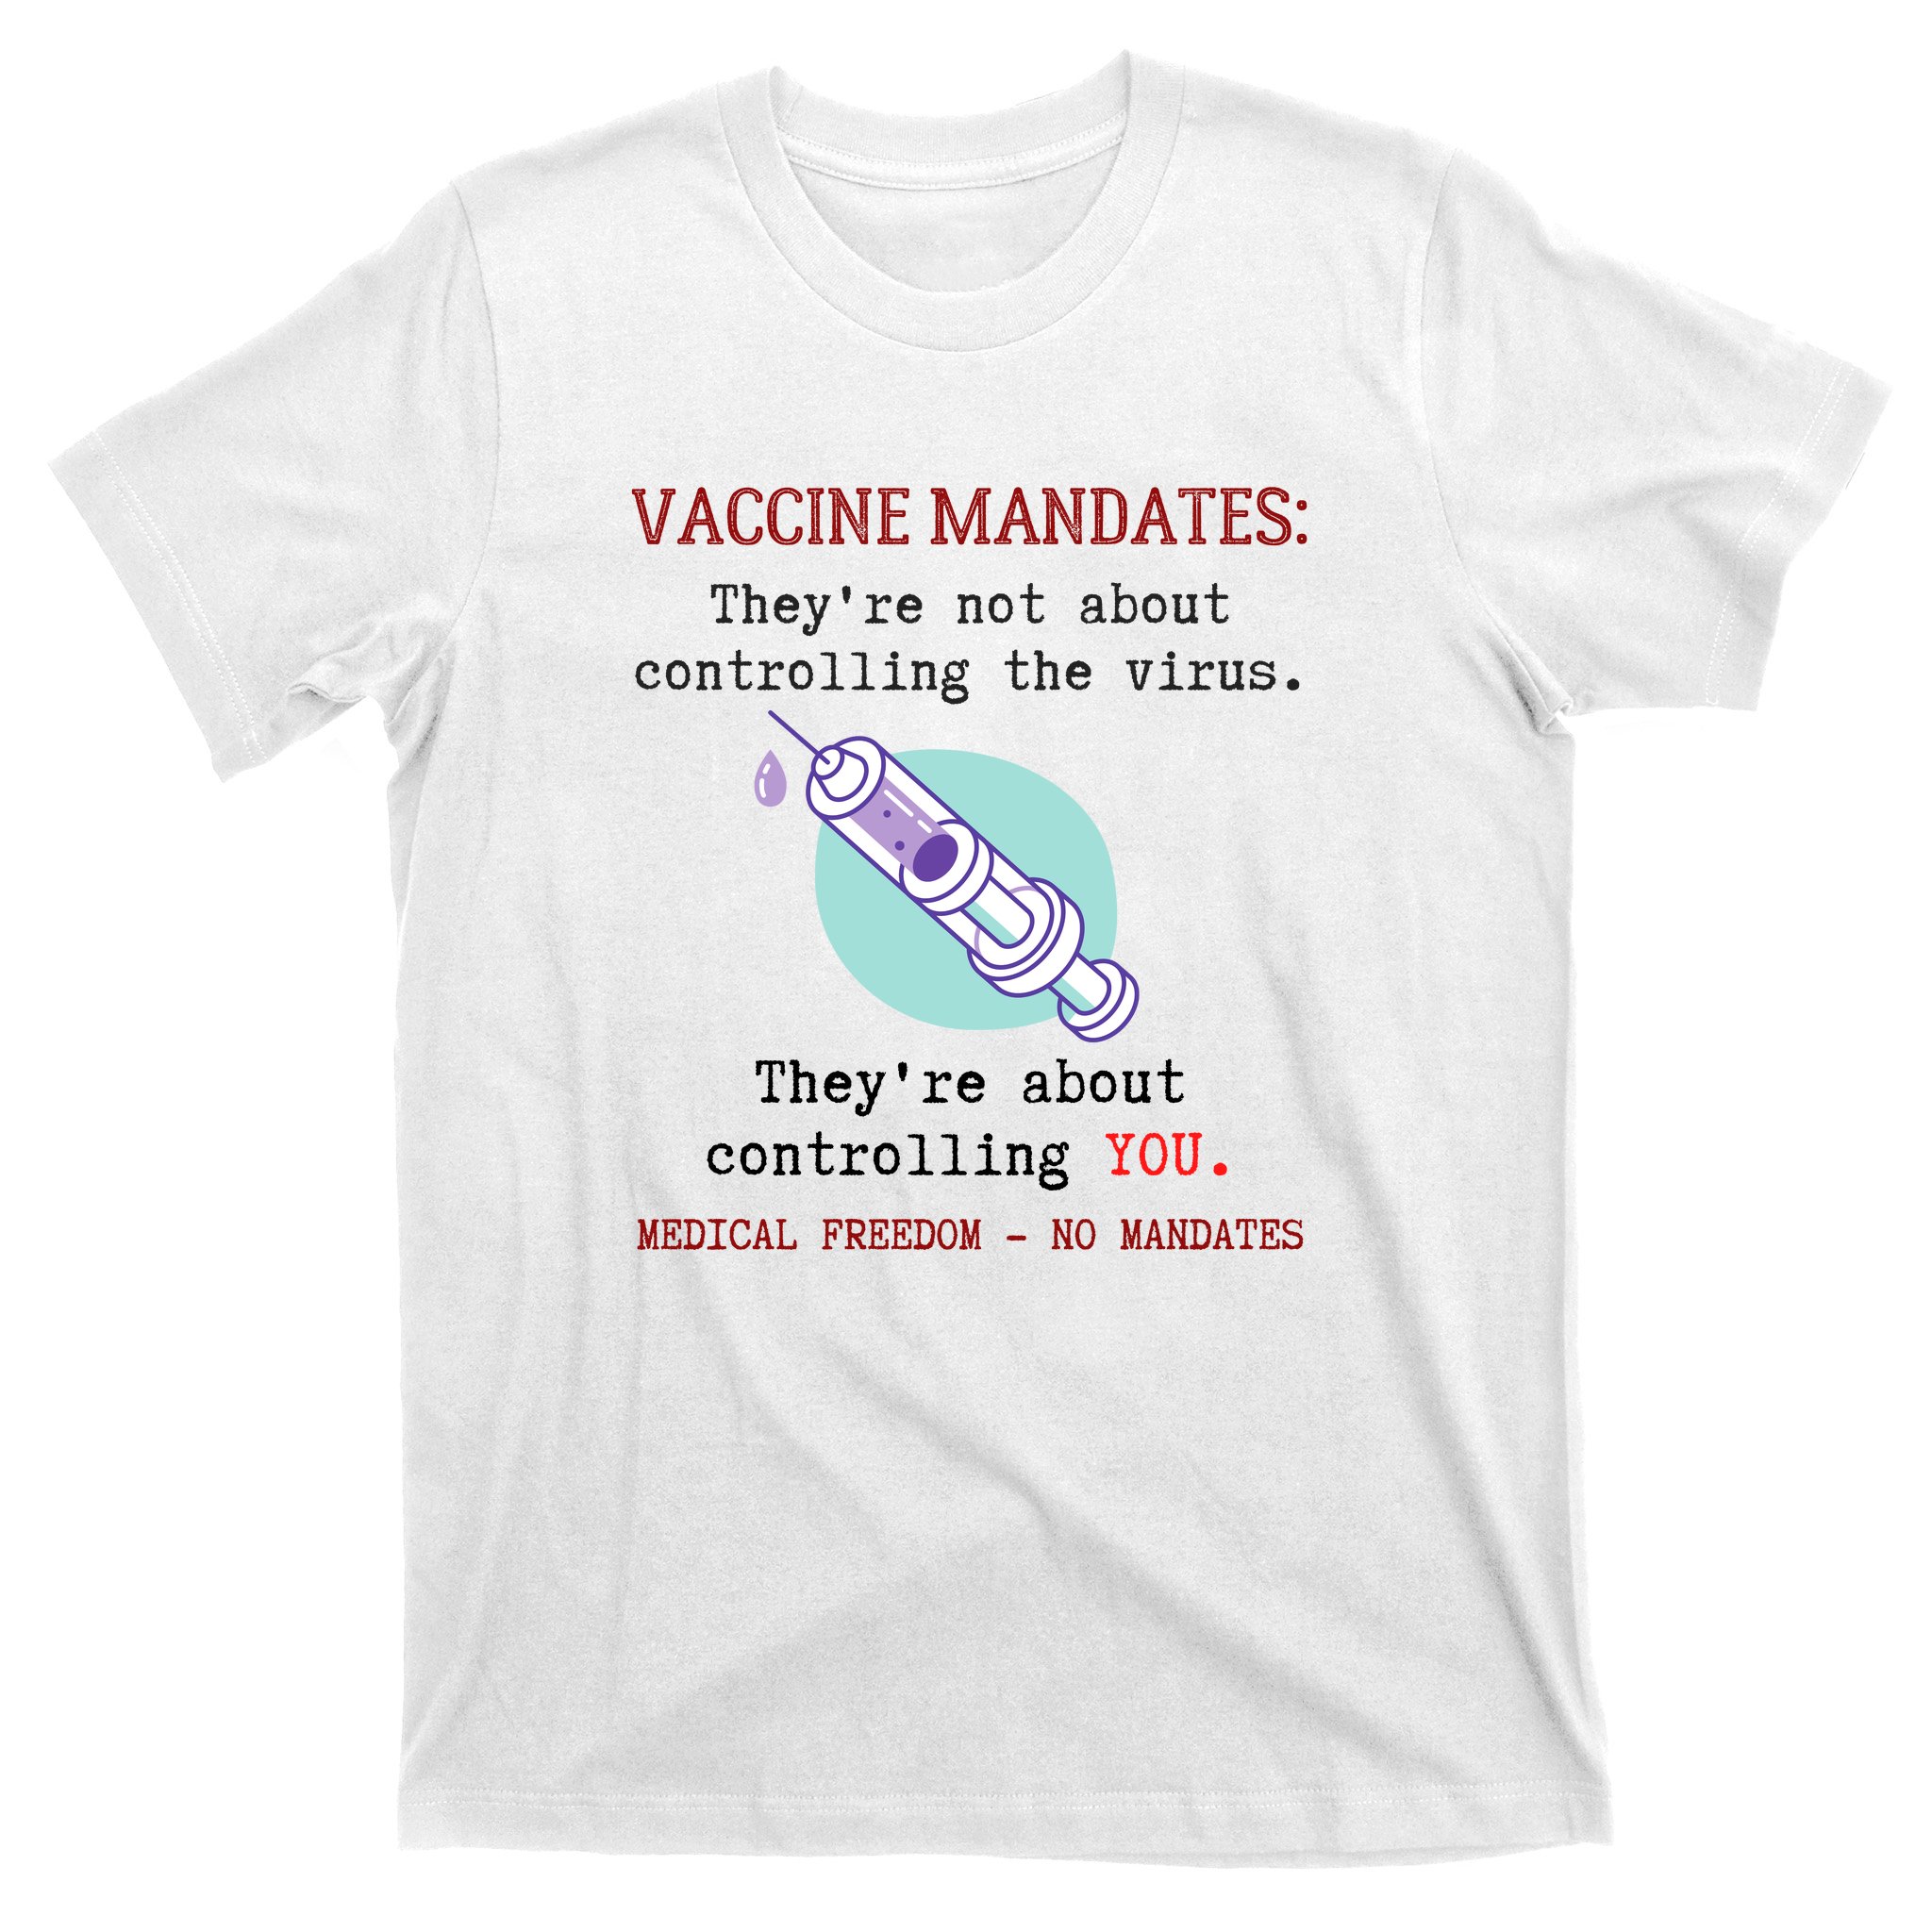 covid Hold the line shirt stop the Mandate medical freedom unvaccinated